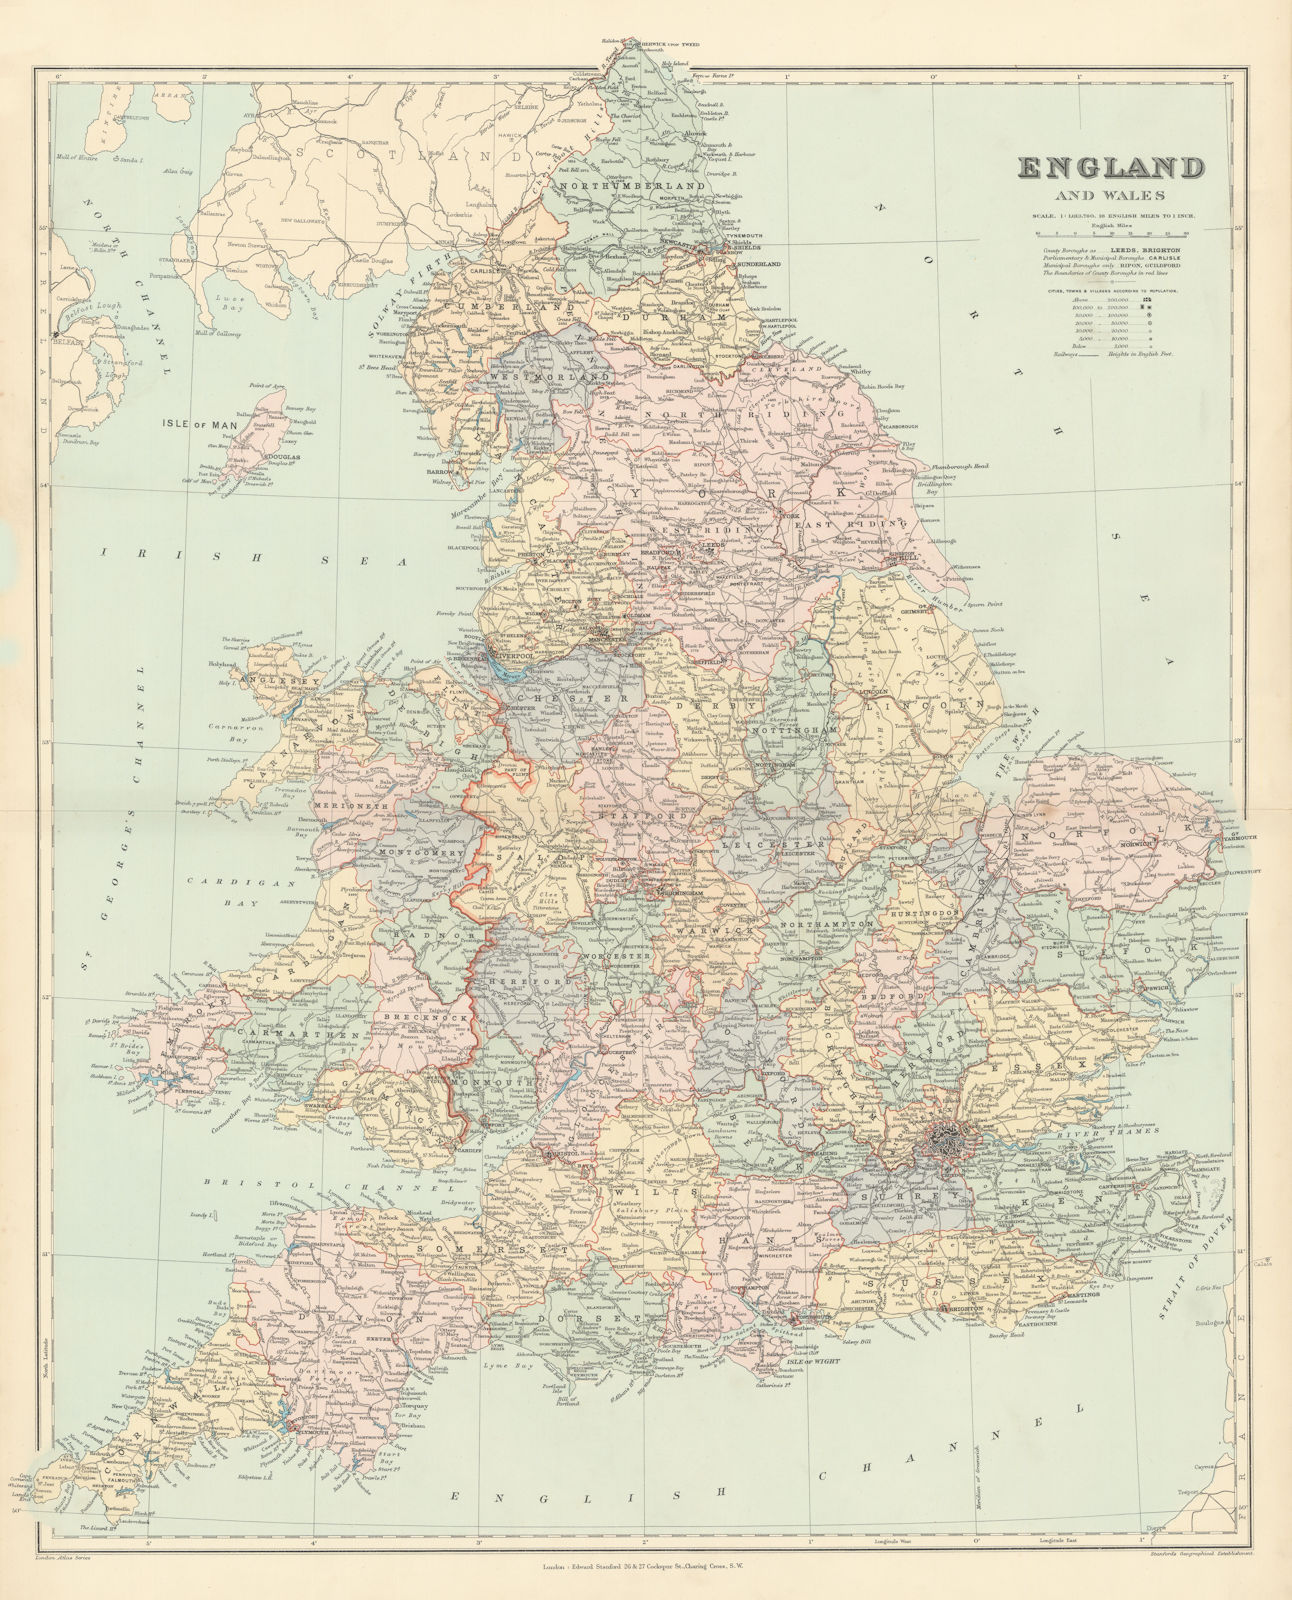 Associate Product England and Wales in counties. Railways. Large 68x55cm. STANFORD 1896 old map